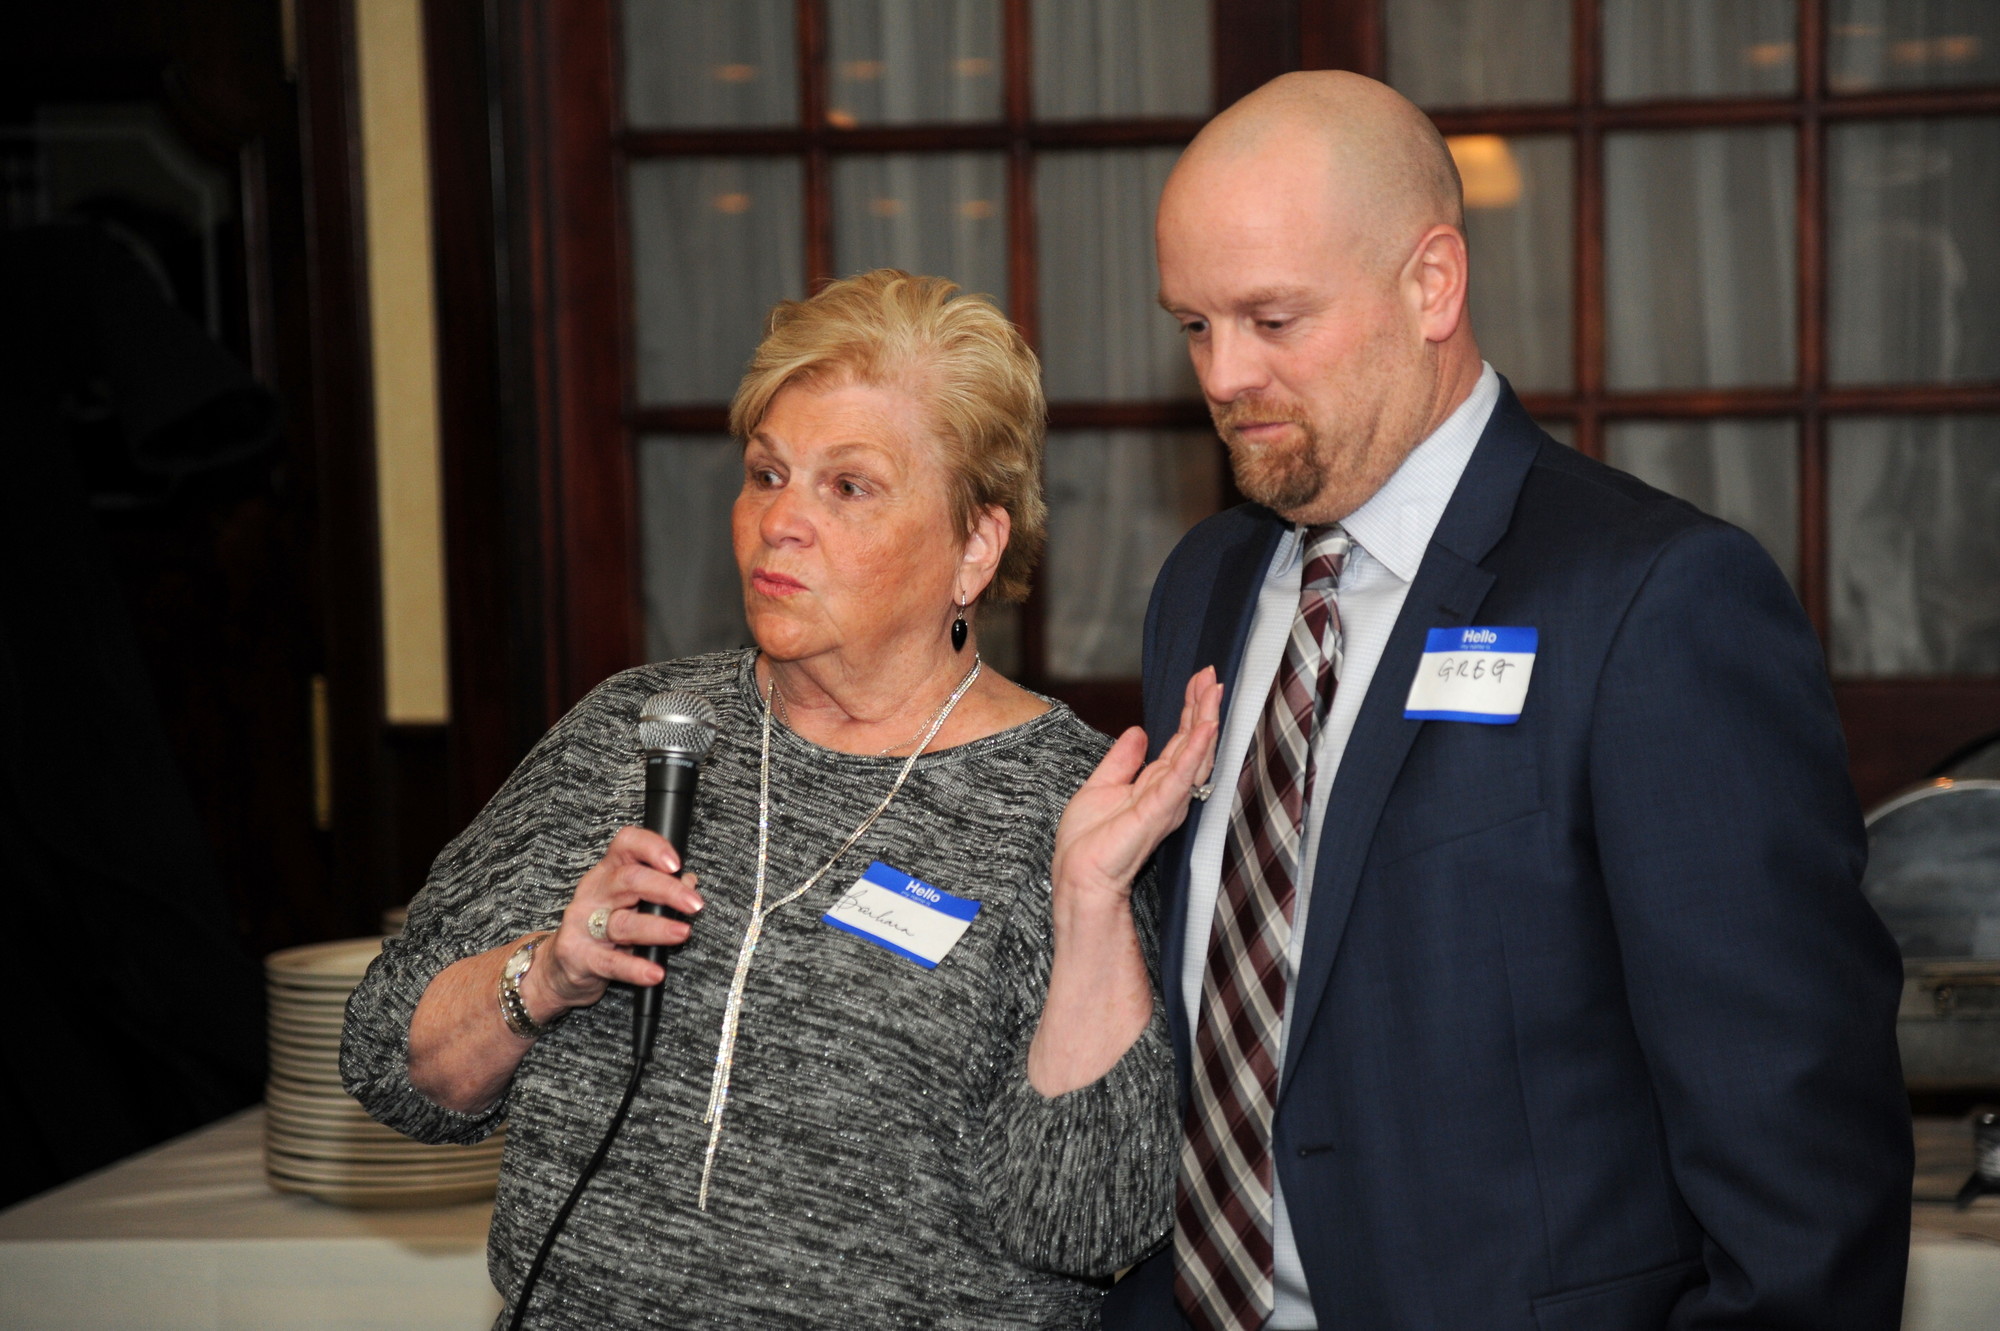 Barbara Goldfeder and Greg Schaefer spoke to Chamber members about their plans for the next year.